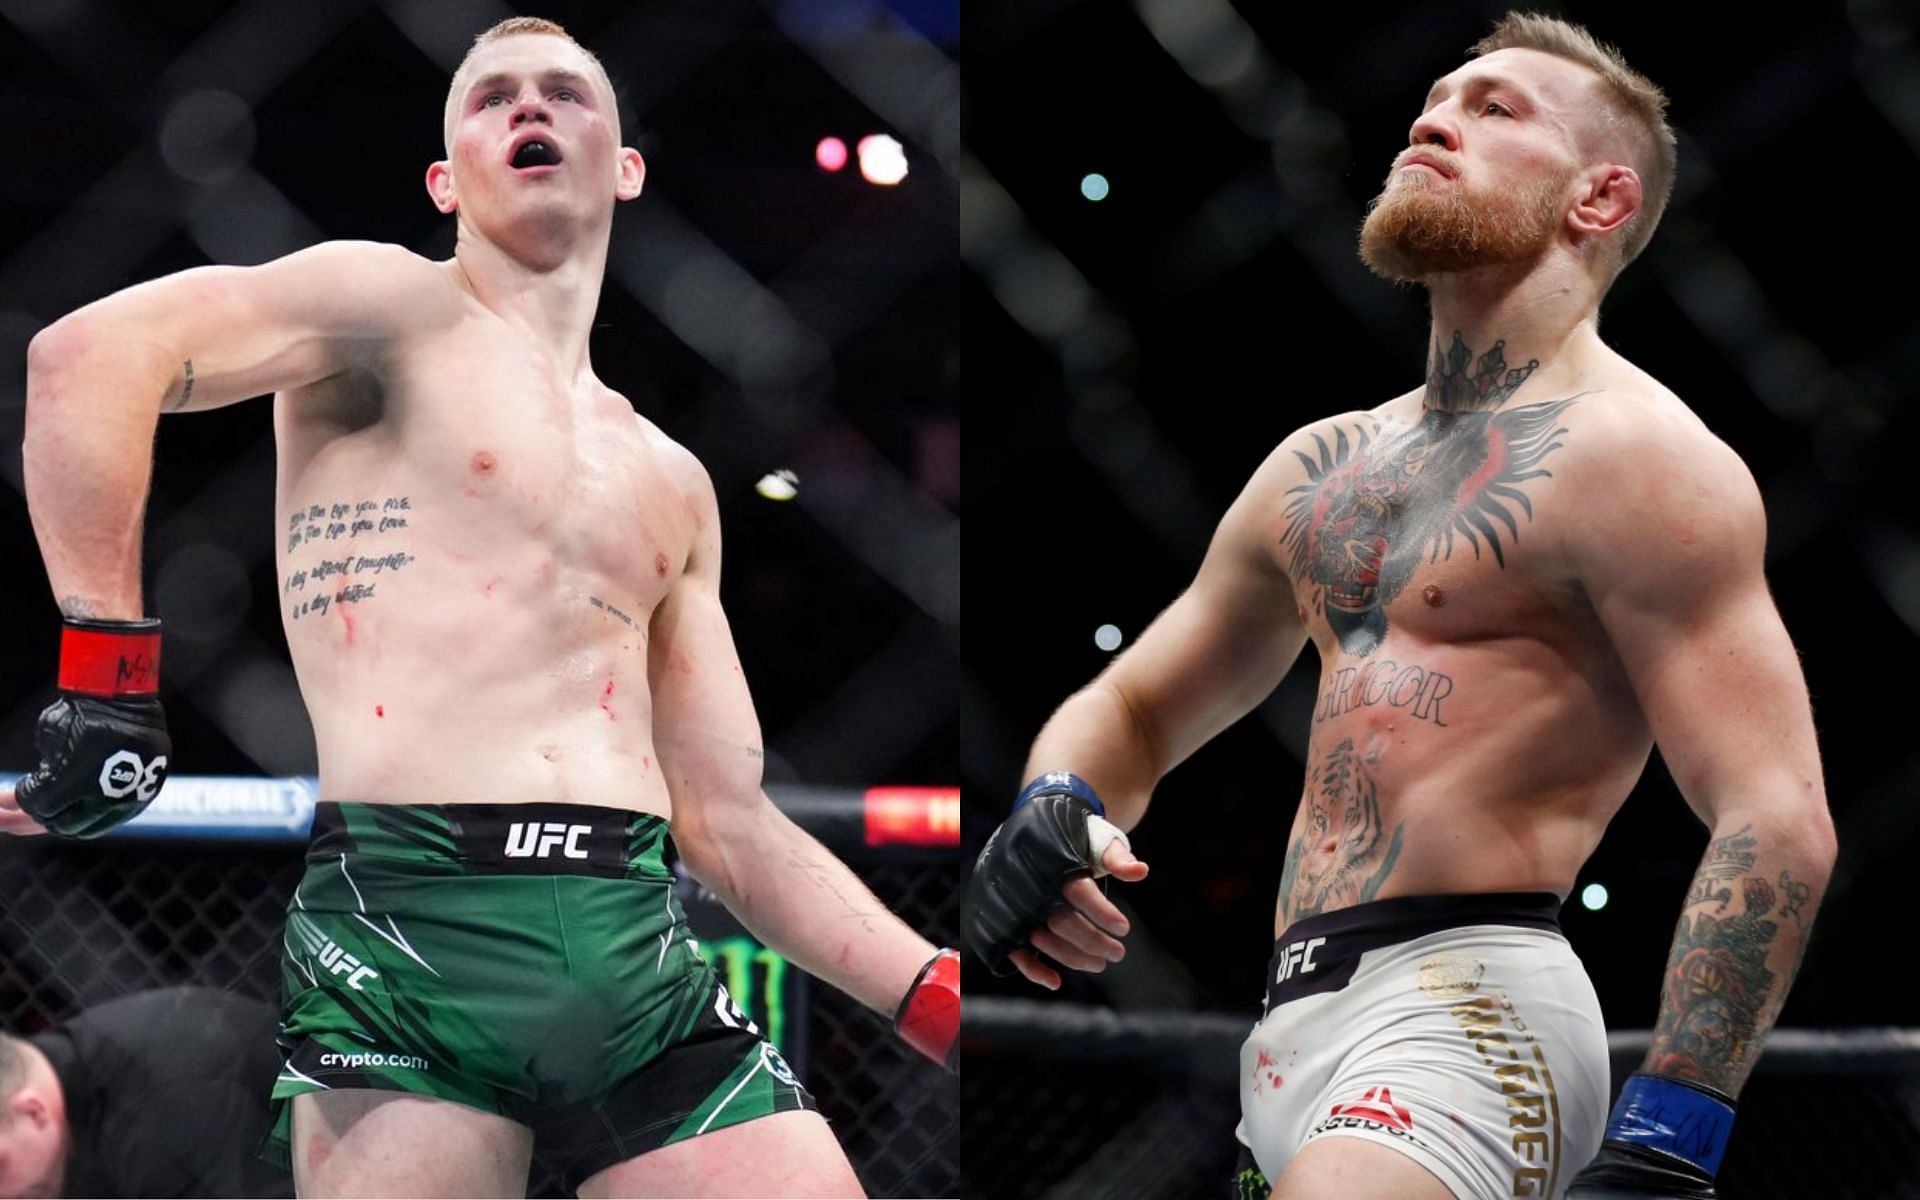 Ian Garry (left) and Conor McGregor (right). [via Getty Images]